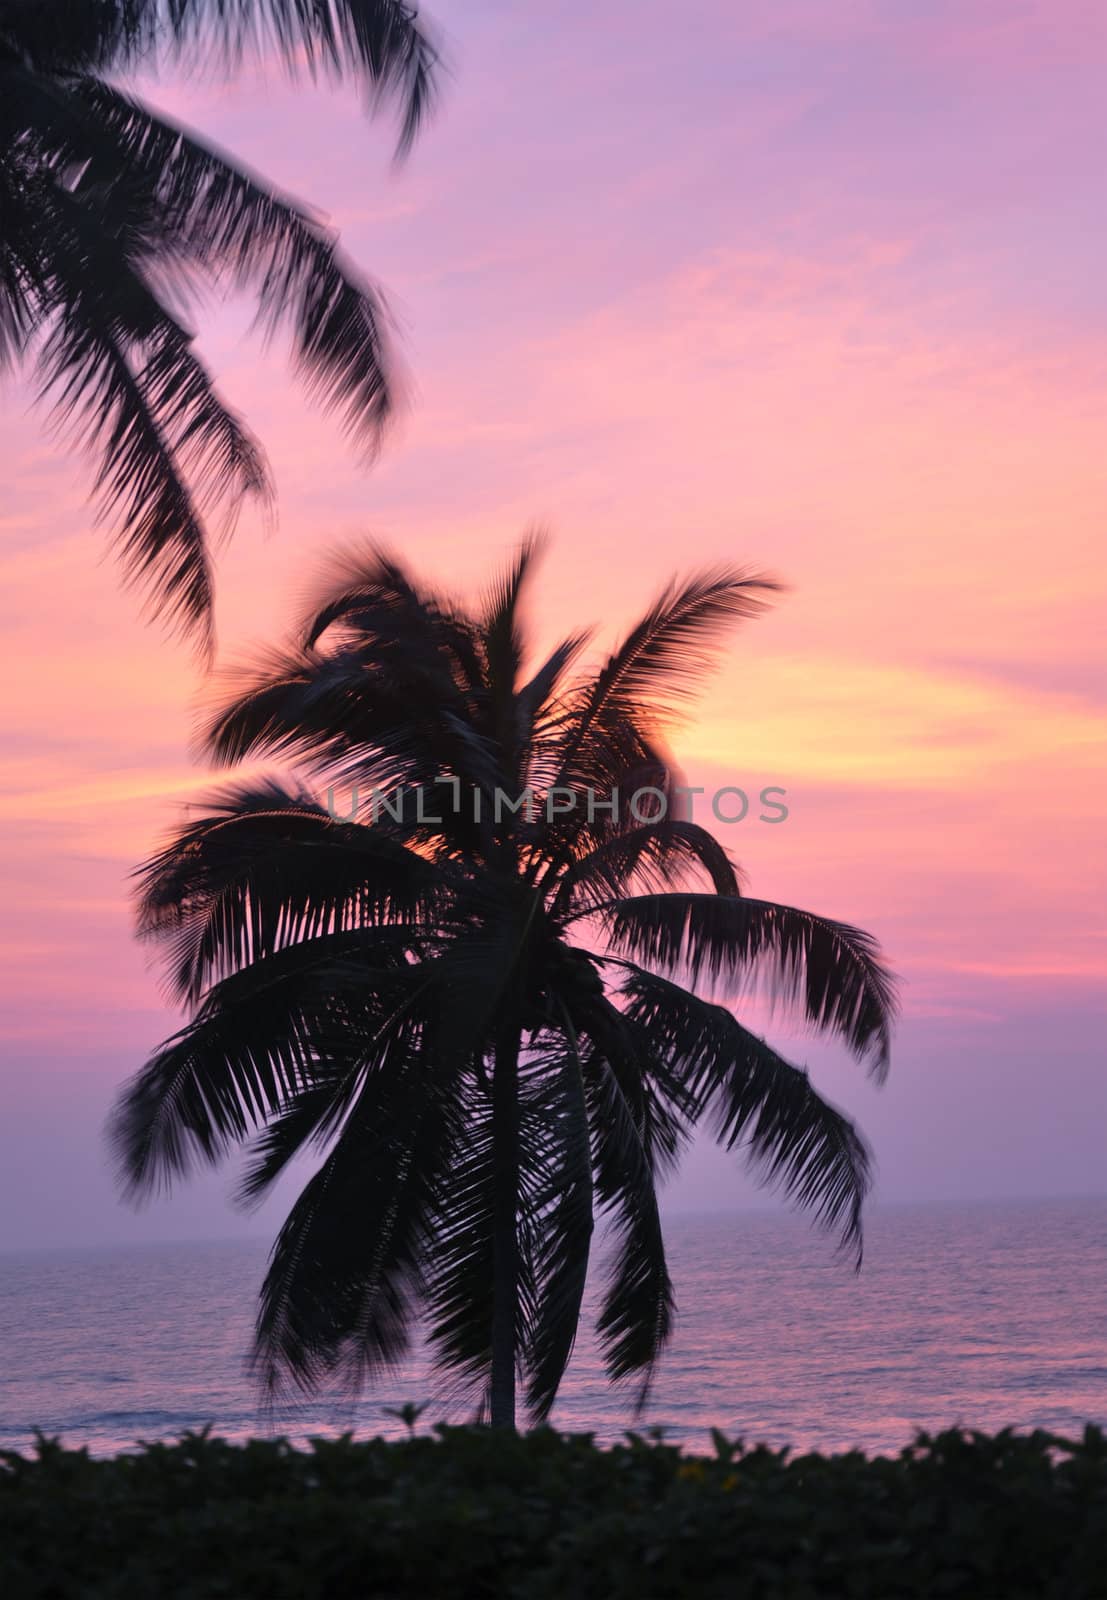 The silhouette of a palm tree on a windy evening in Sri Lanka